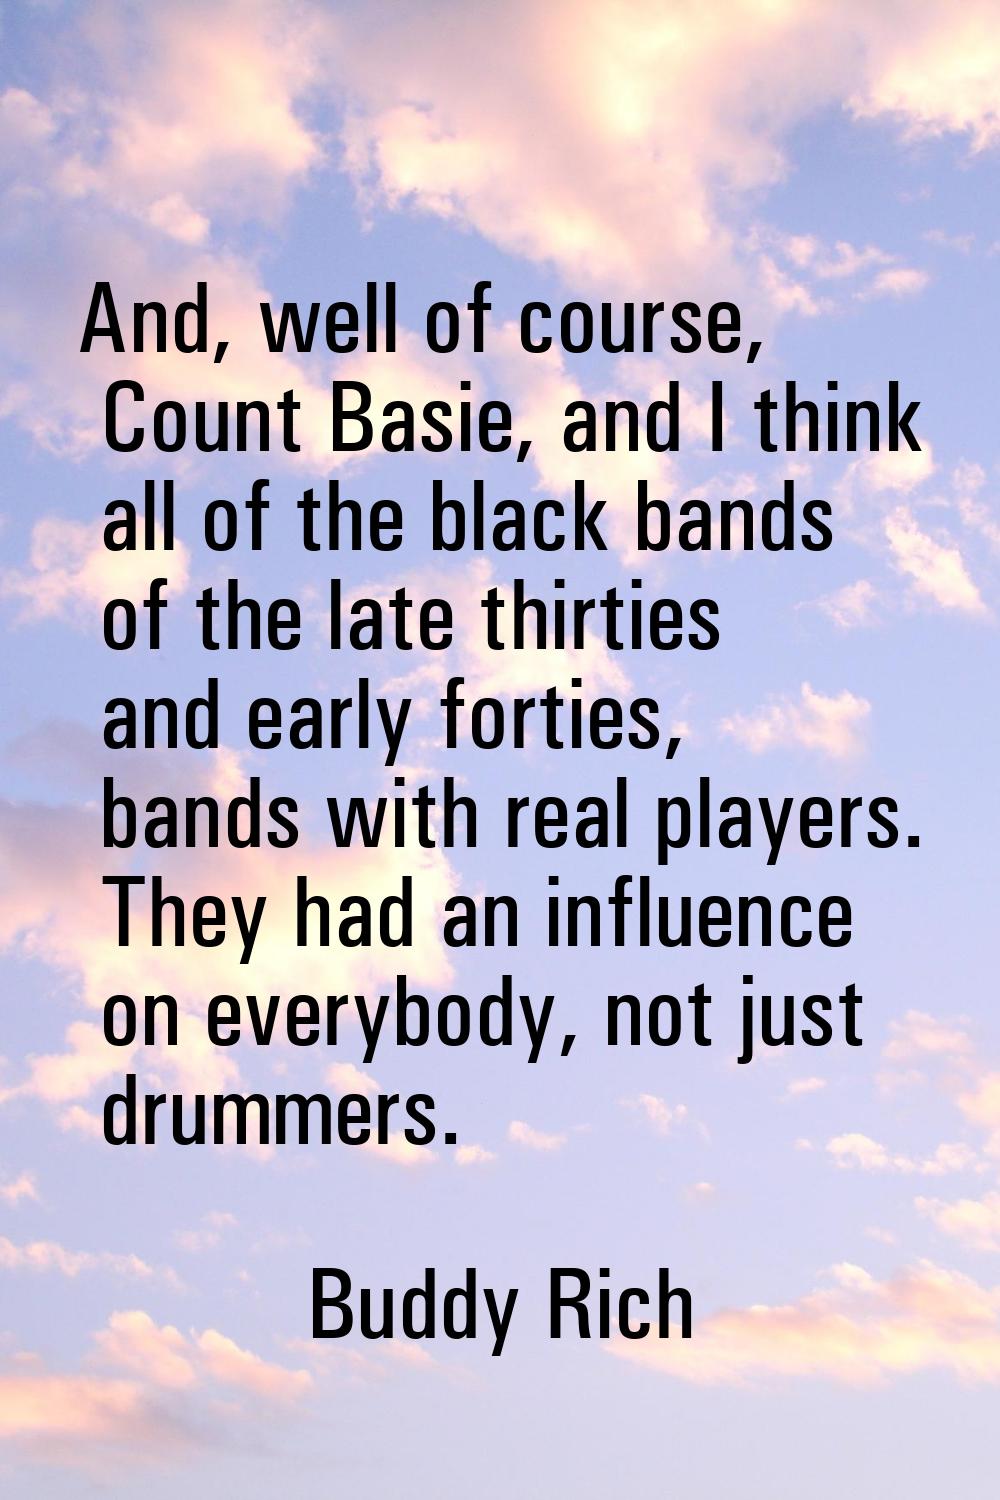 And, well of course, Count Basie, and I think all of the black bands of the late thirties and early